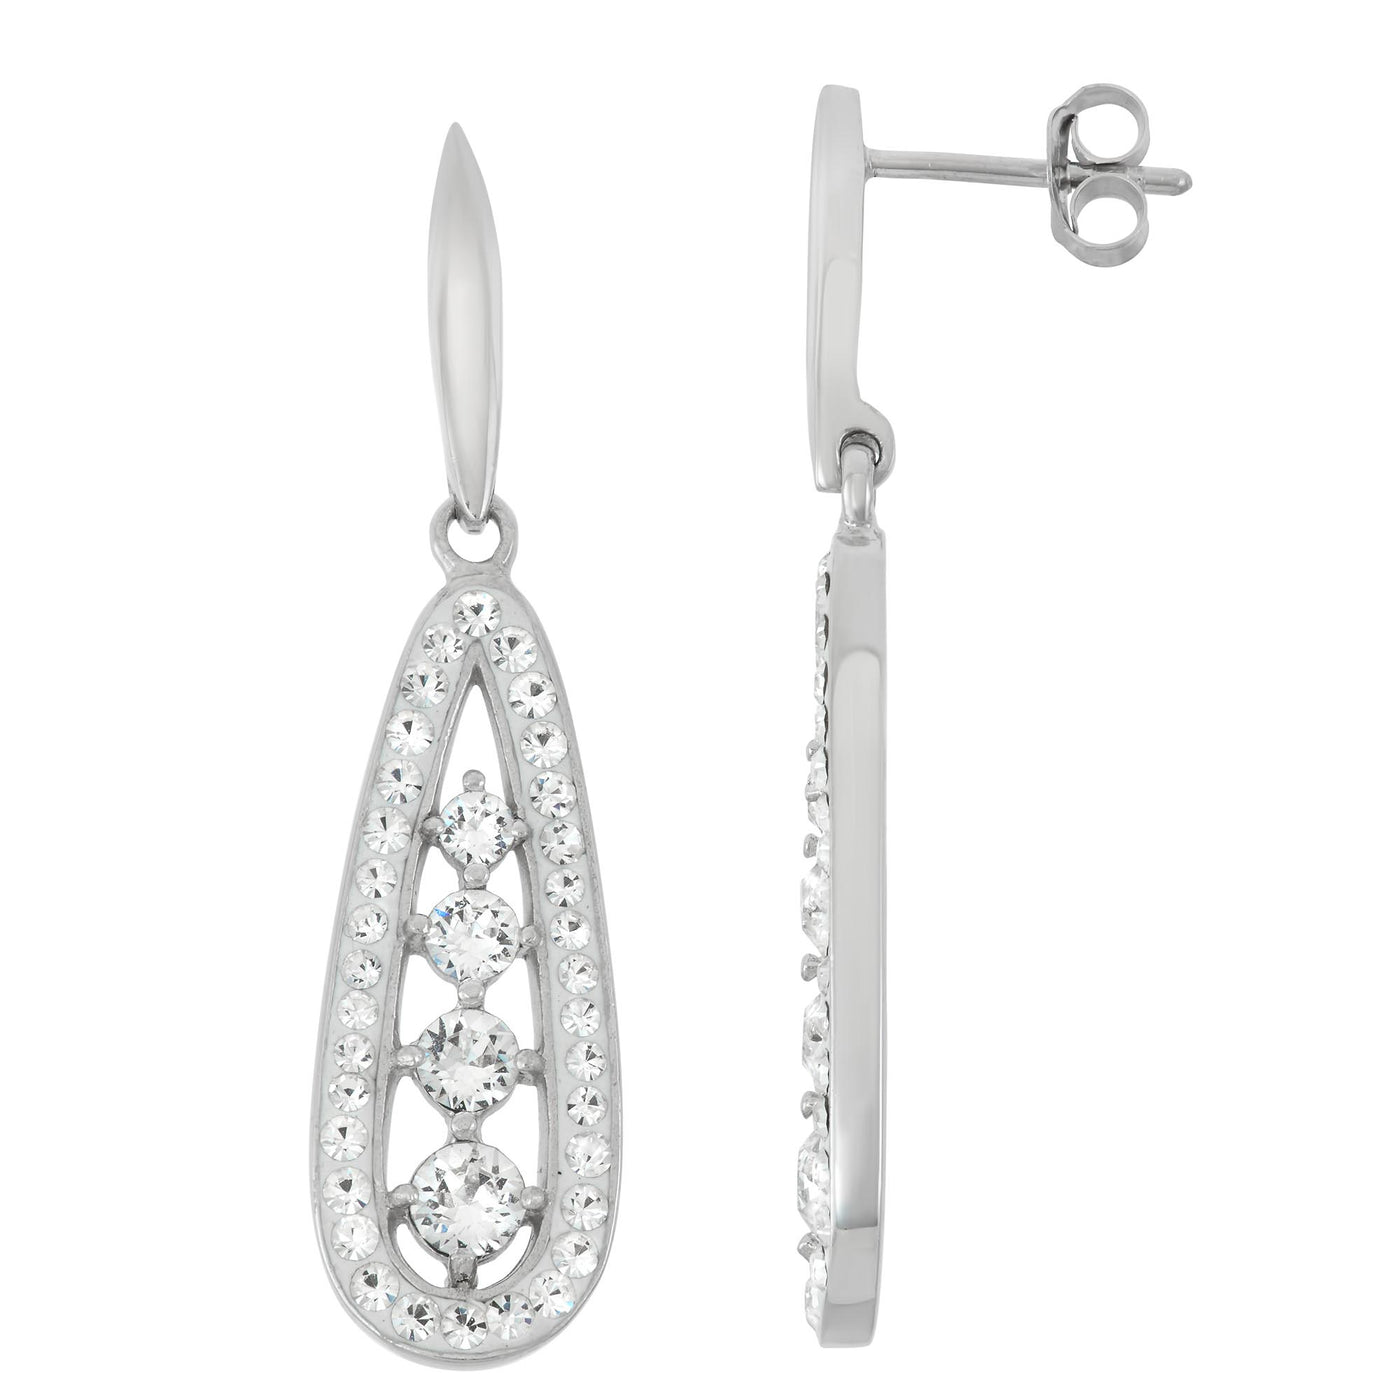 Rebecca Sloane Sterling Silver Earring With White Crystal